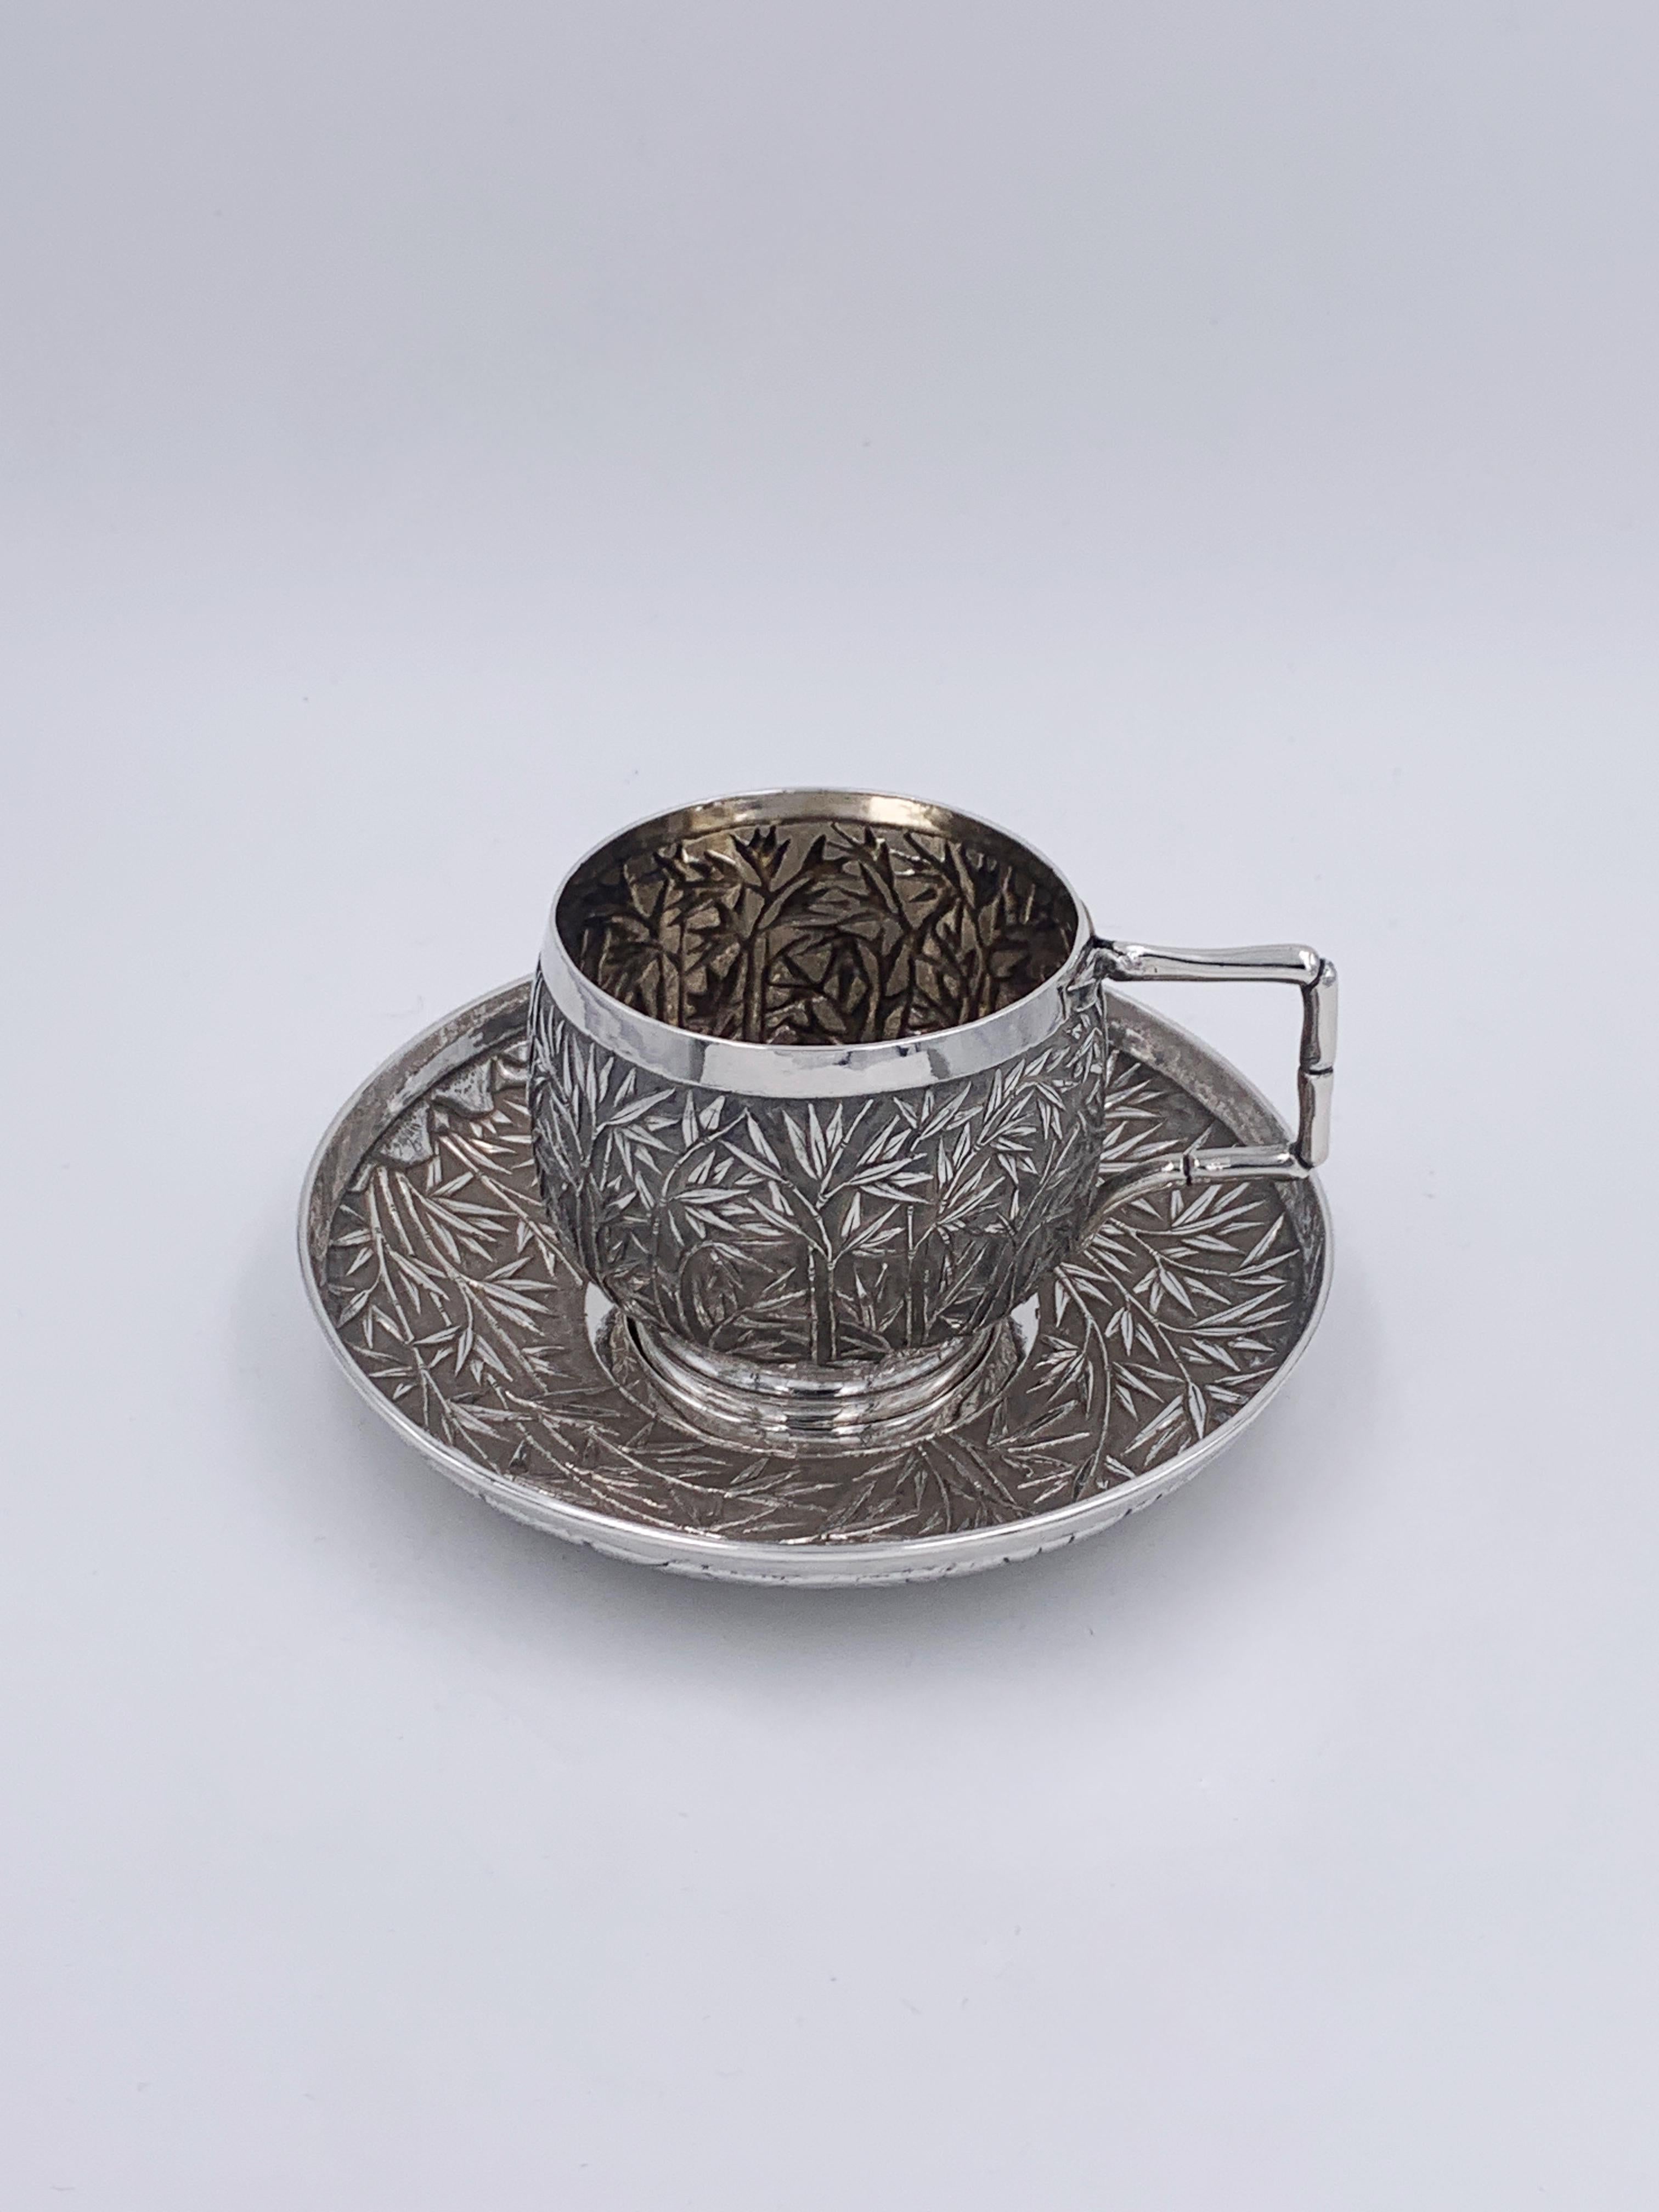 A Chinese Export Silver Tea Cup and Saucer embossed and chased with bamboo against a matte background. The cup has a bamboo-form handle and sits on a plain collet foot, and the saucer has the same decoration.The retailer marked as WH for 'Wang Hing'